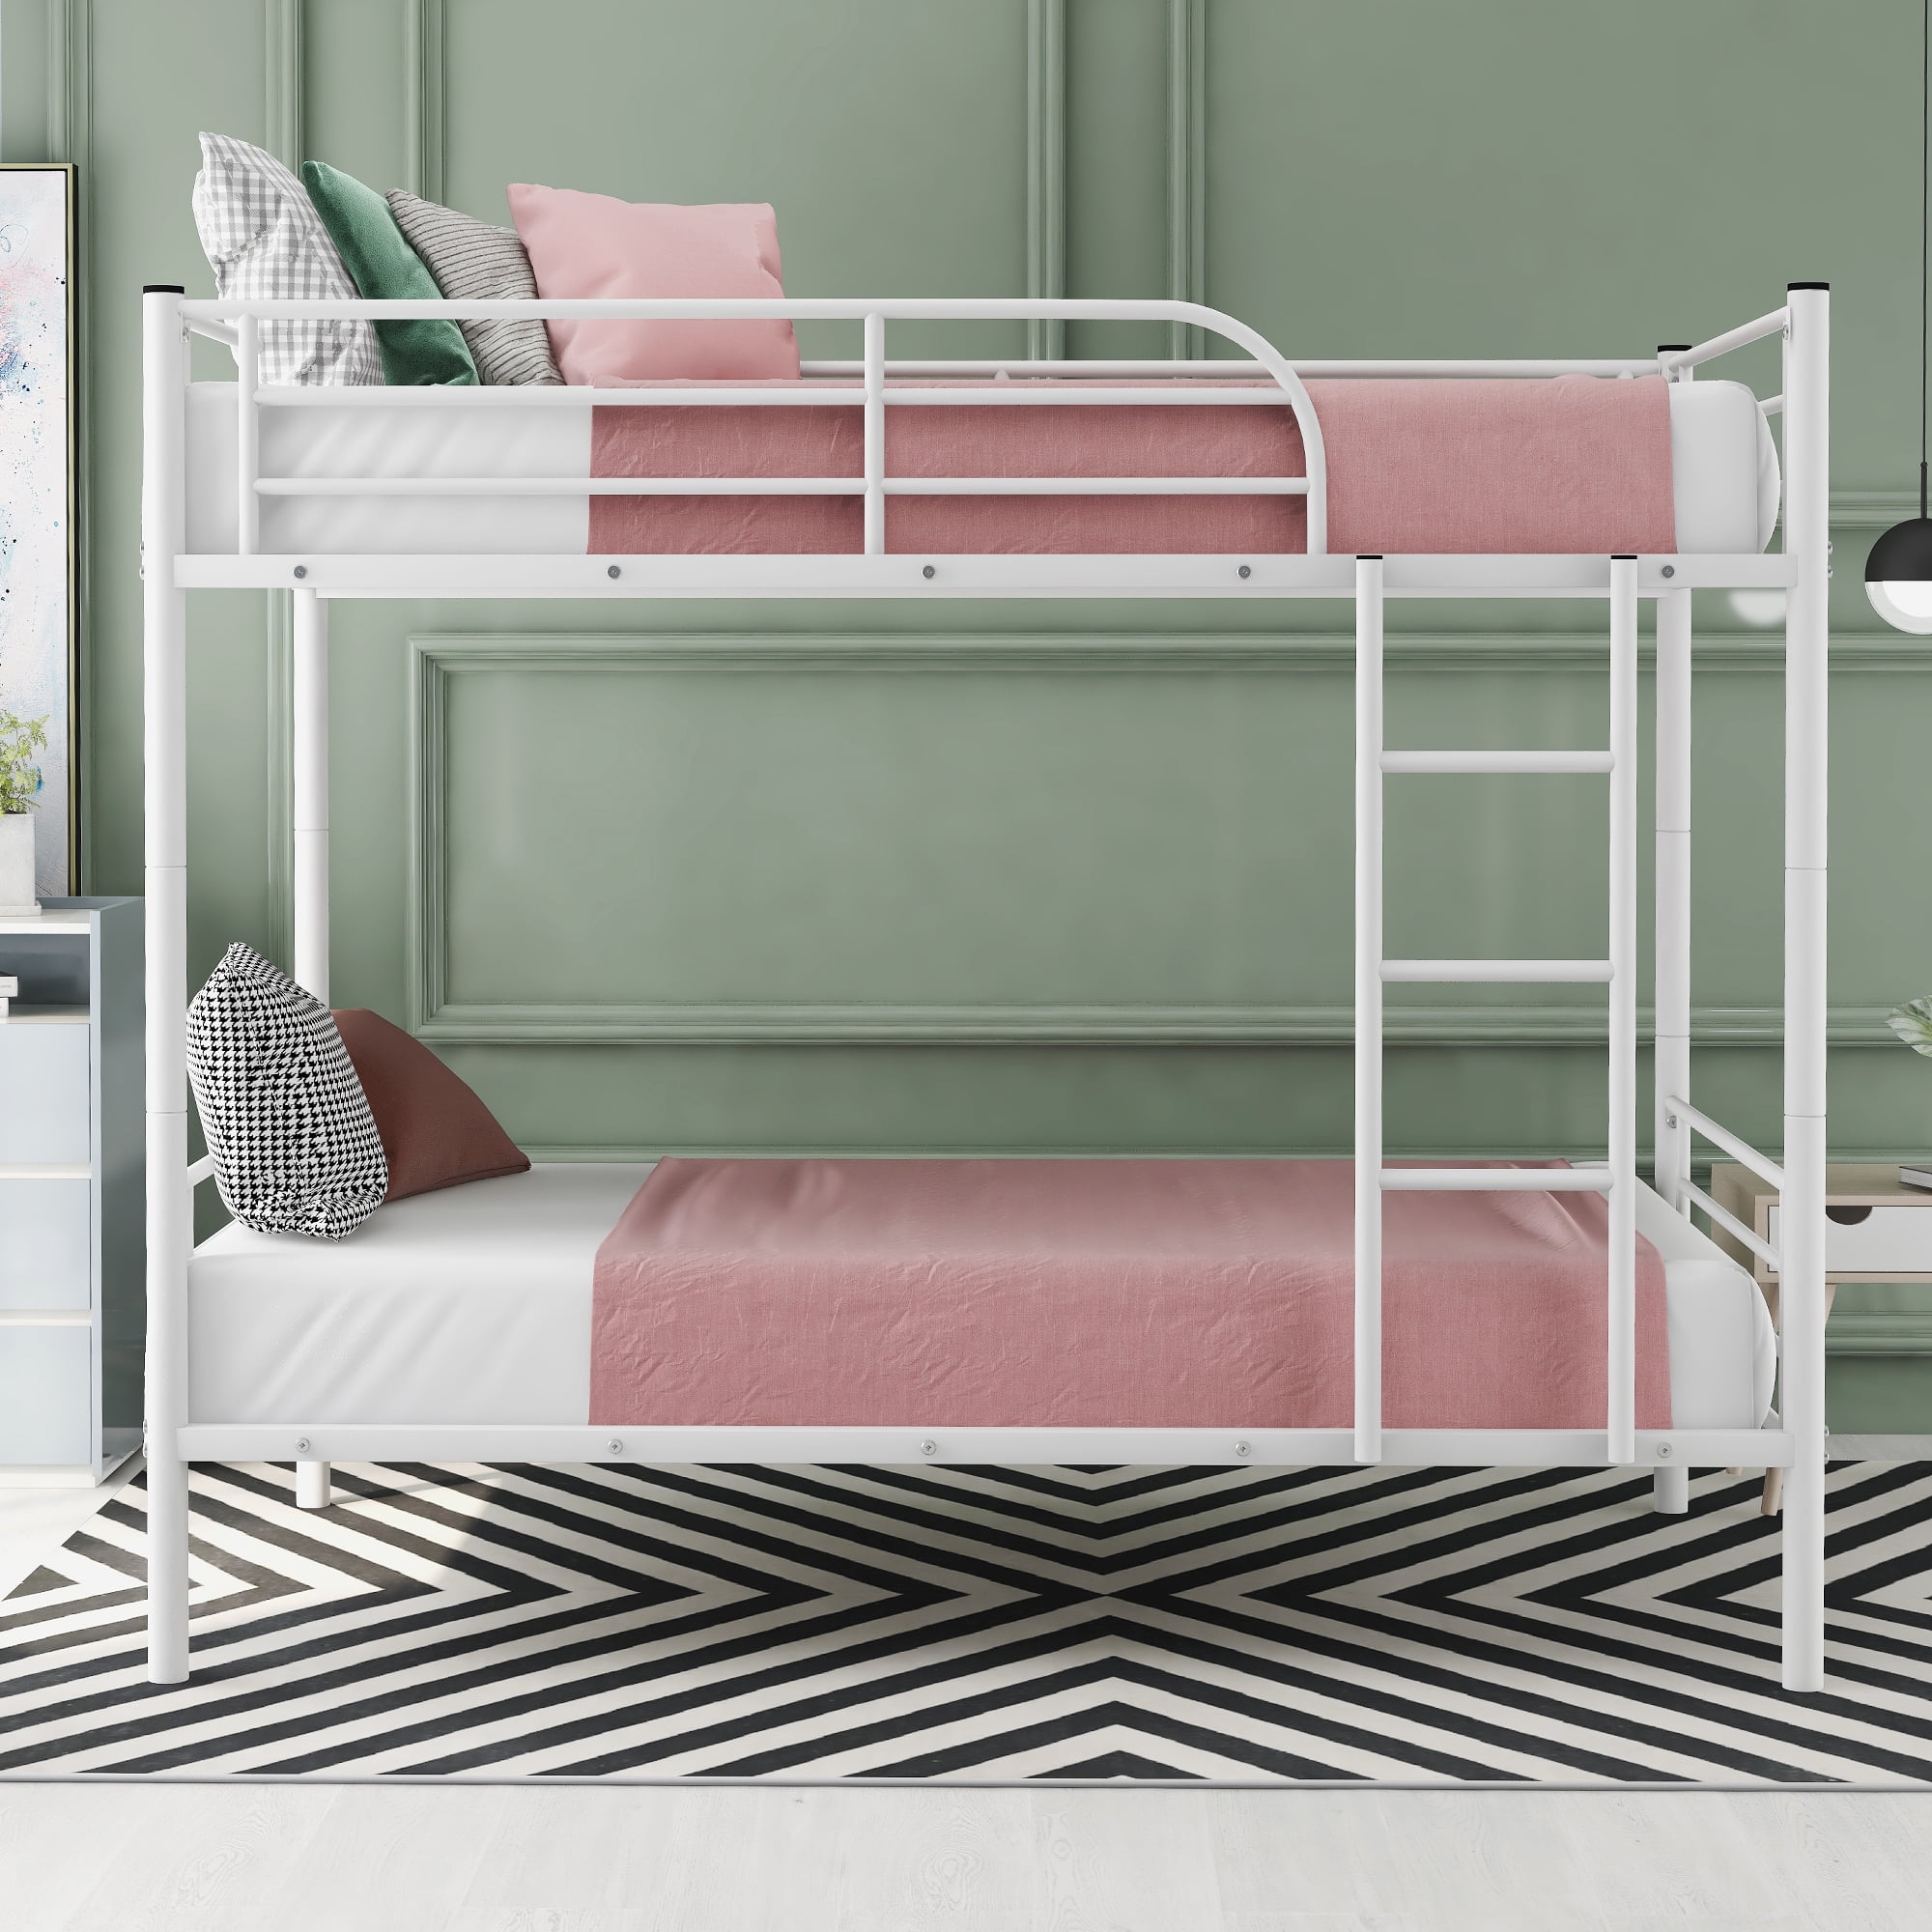 Twin Bunk Bed Btmway Metal, How Much Does A Bunk Bed Weigh